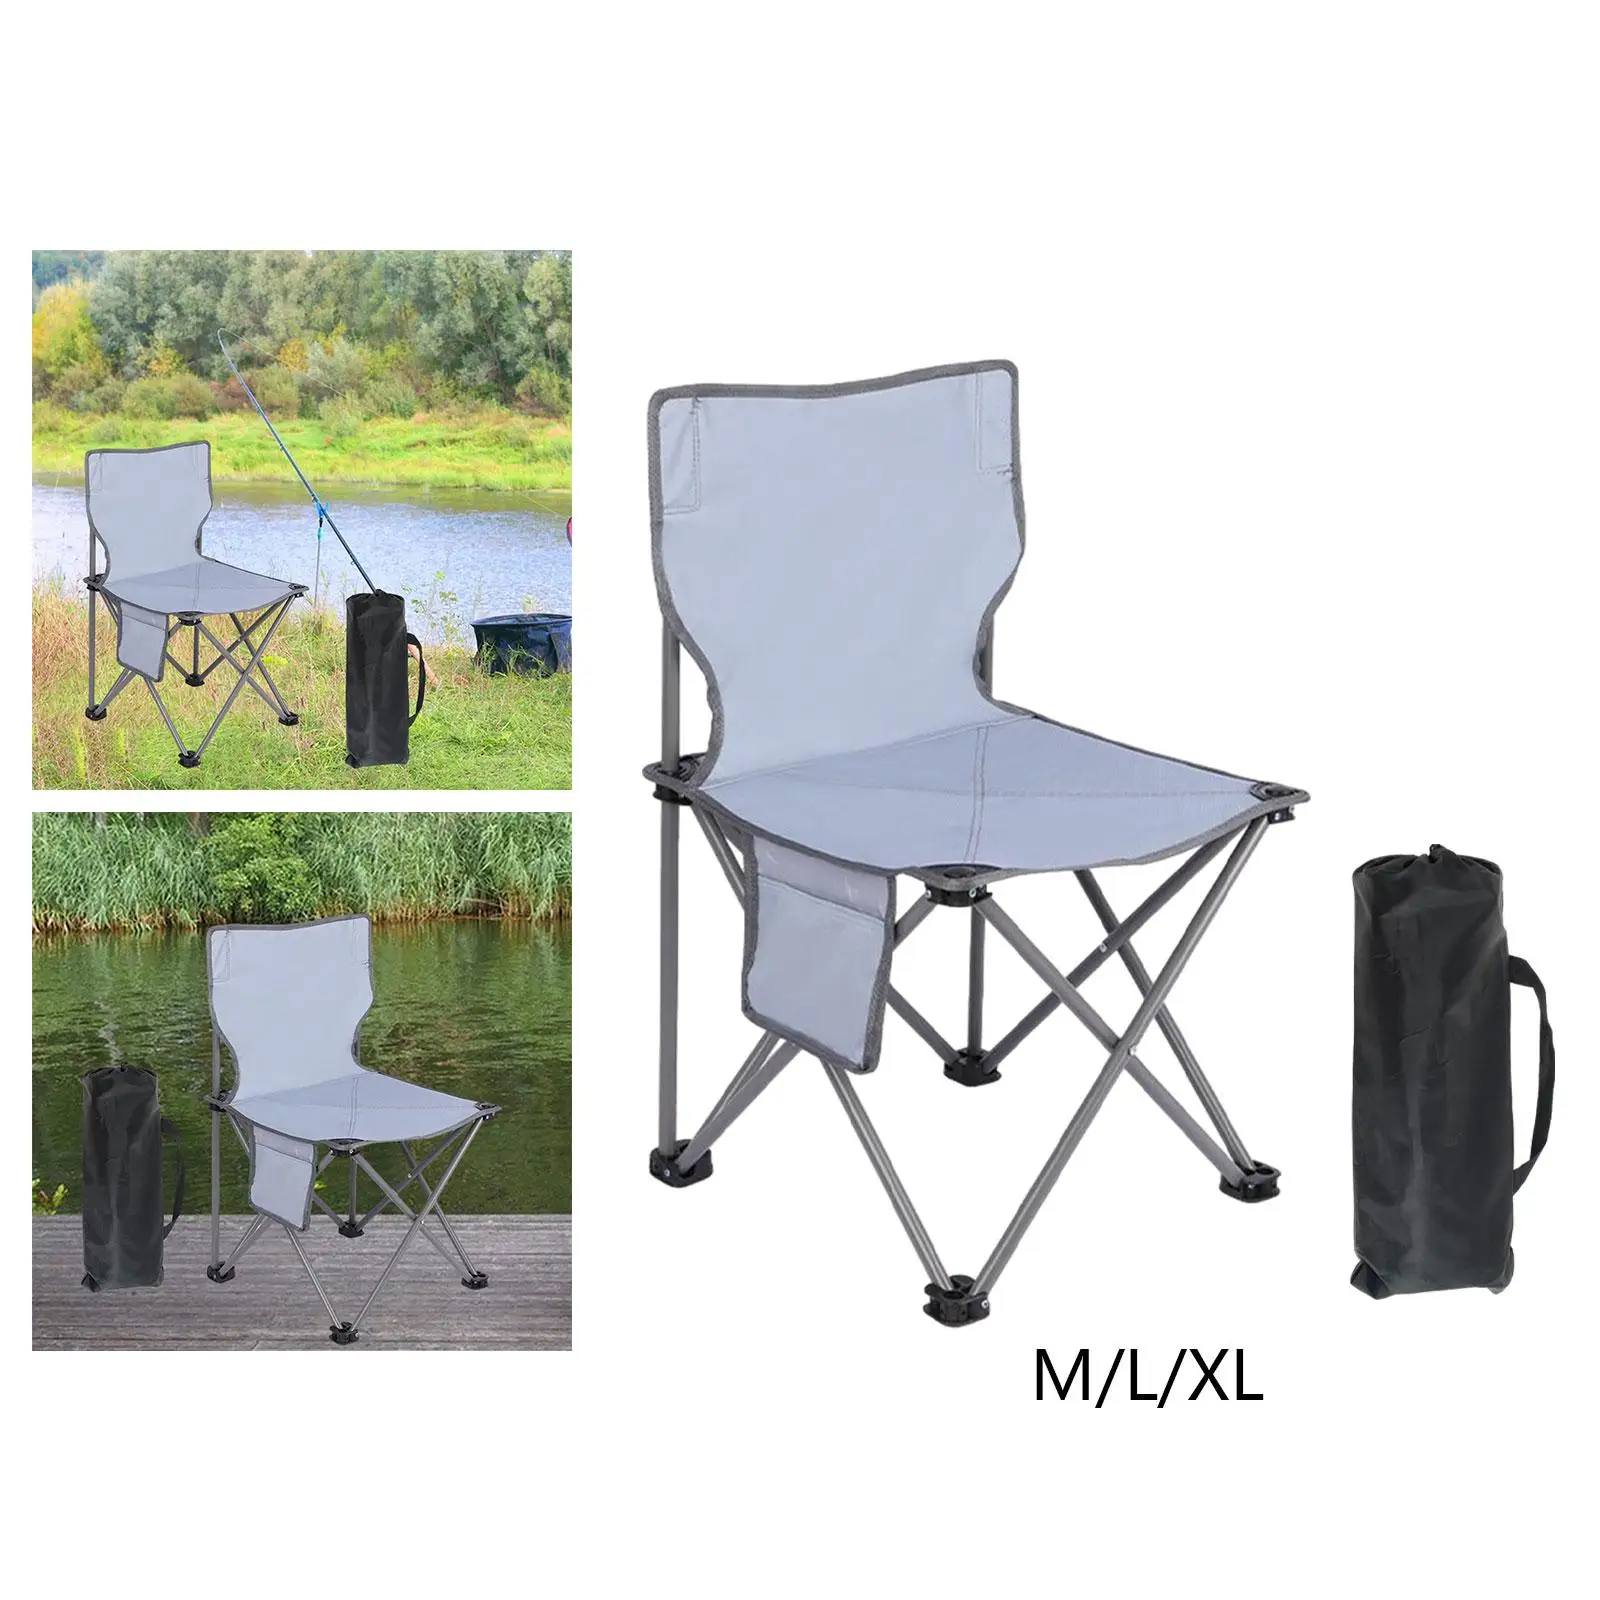 Portable Camping Chair Collapsible Chair Heavy Duty High Back Fishing Chair Folding Chair for Lawn Beach Patio Picnic Garden